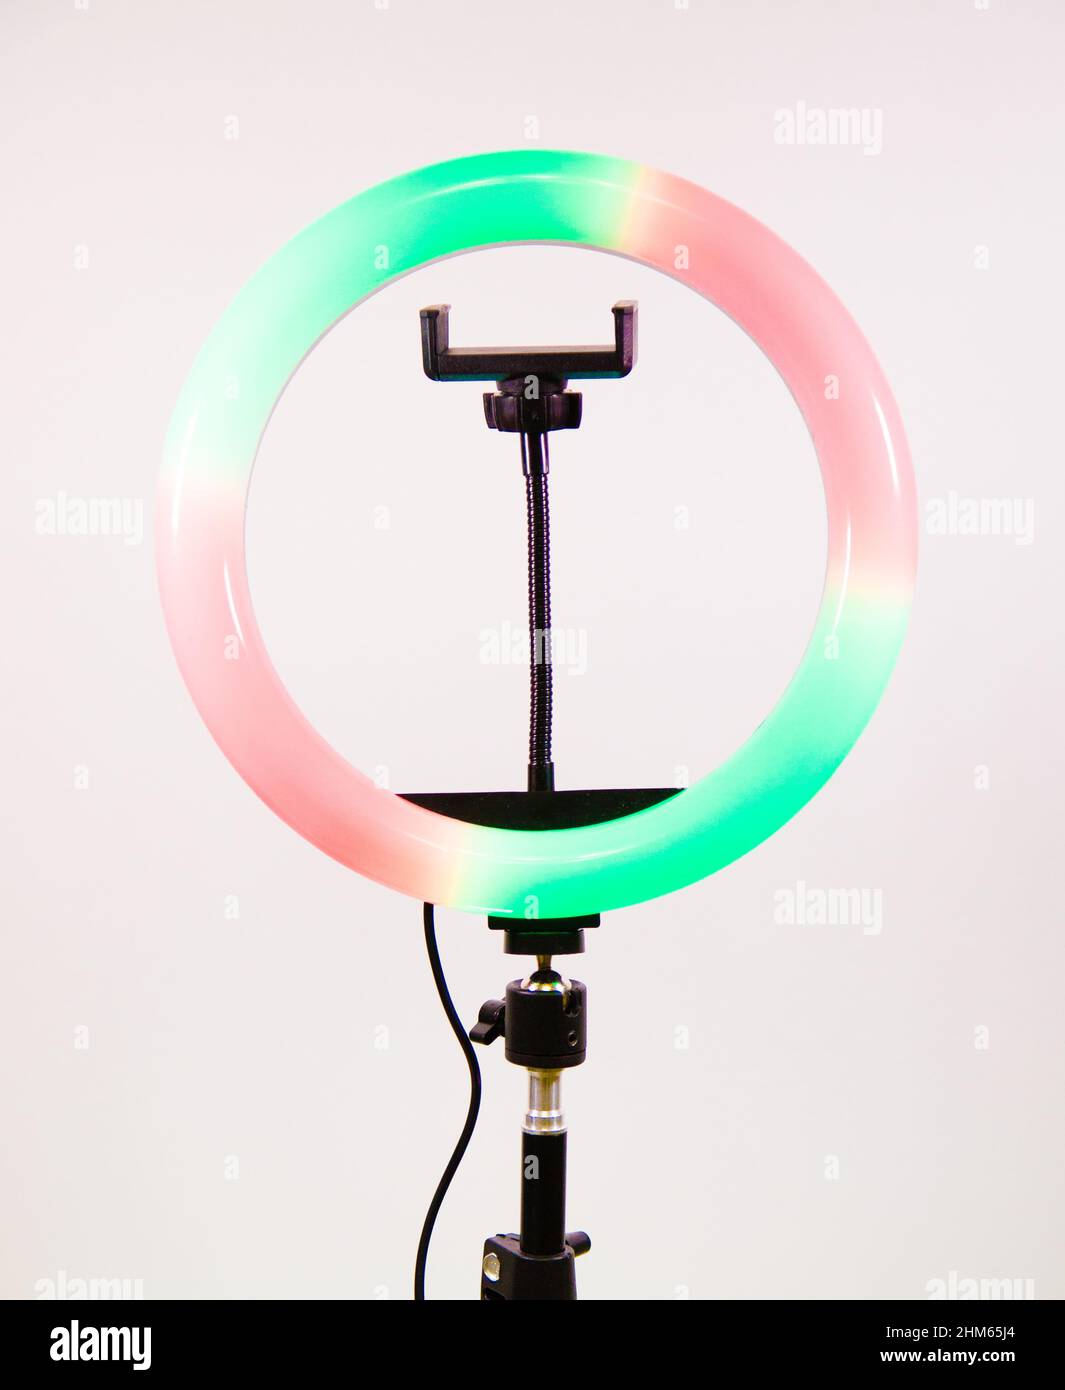 Ring lamp shines in two colors. Red and green. Stock Photo